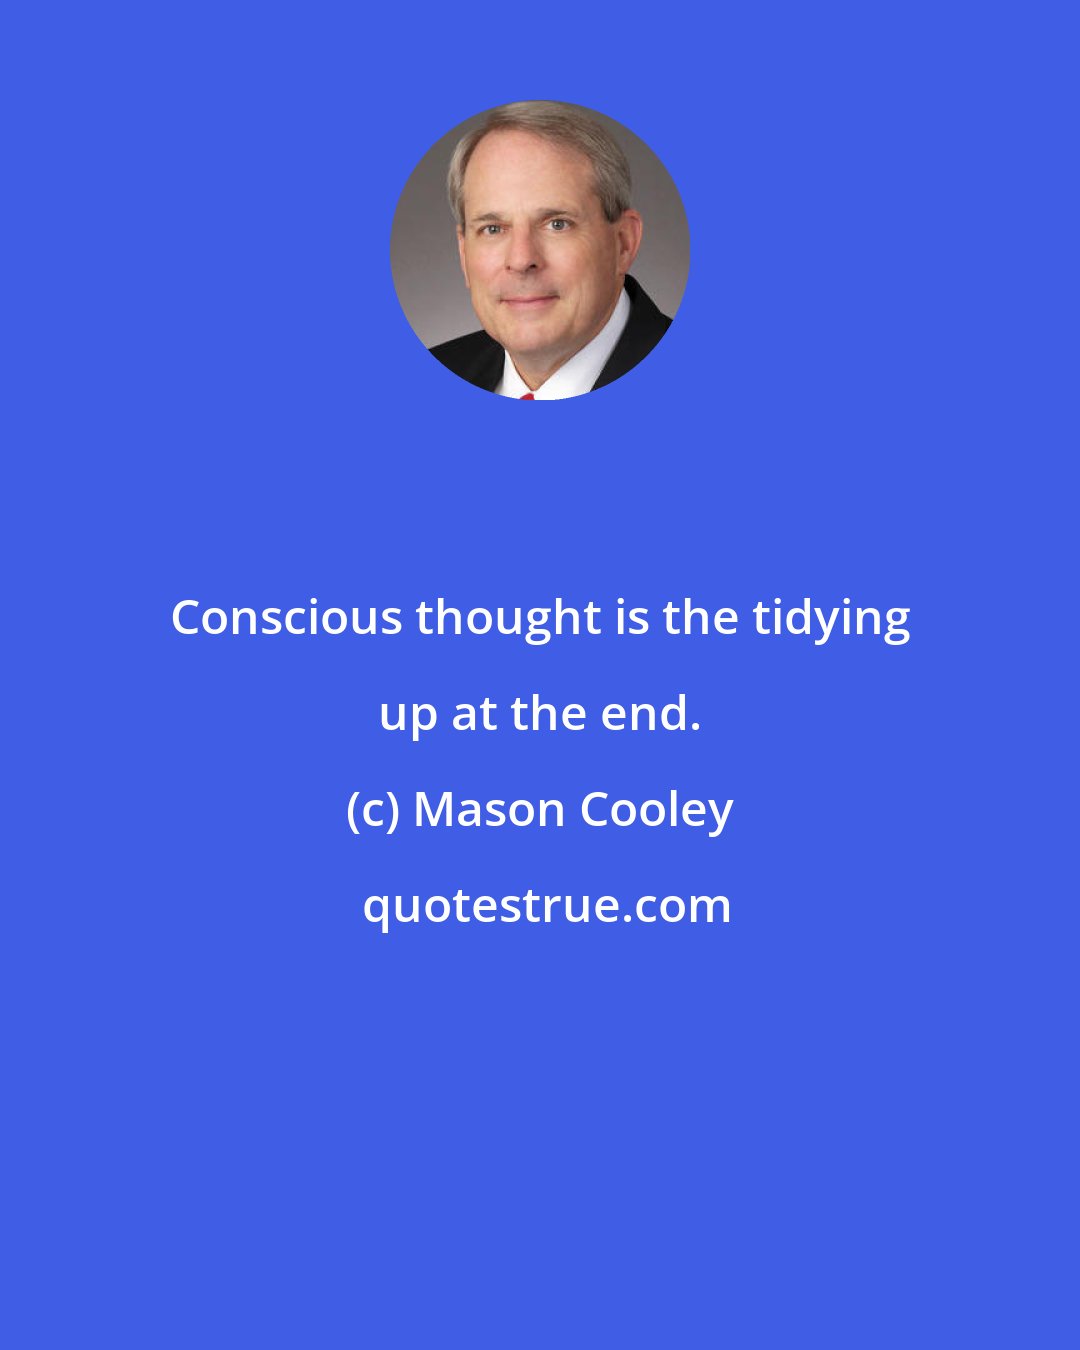 Mason Cooley: Conscious thought is the tidying up at the end.